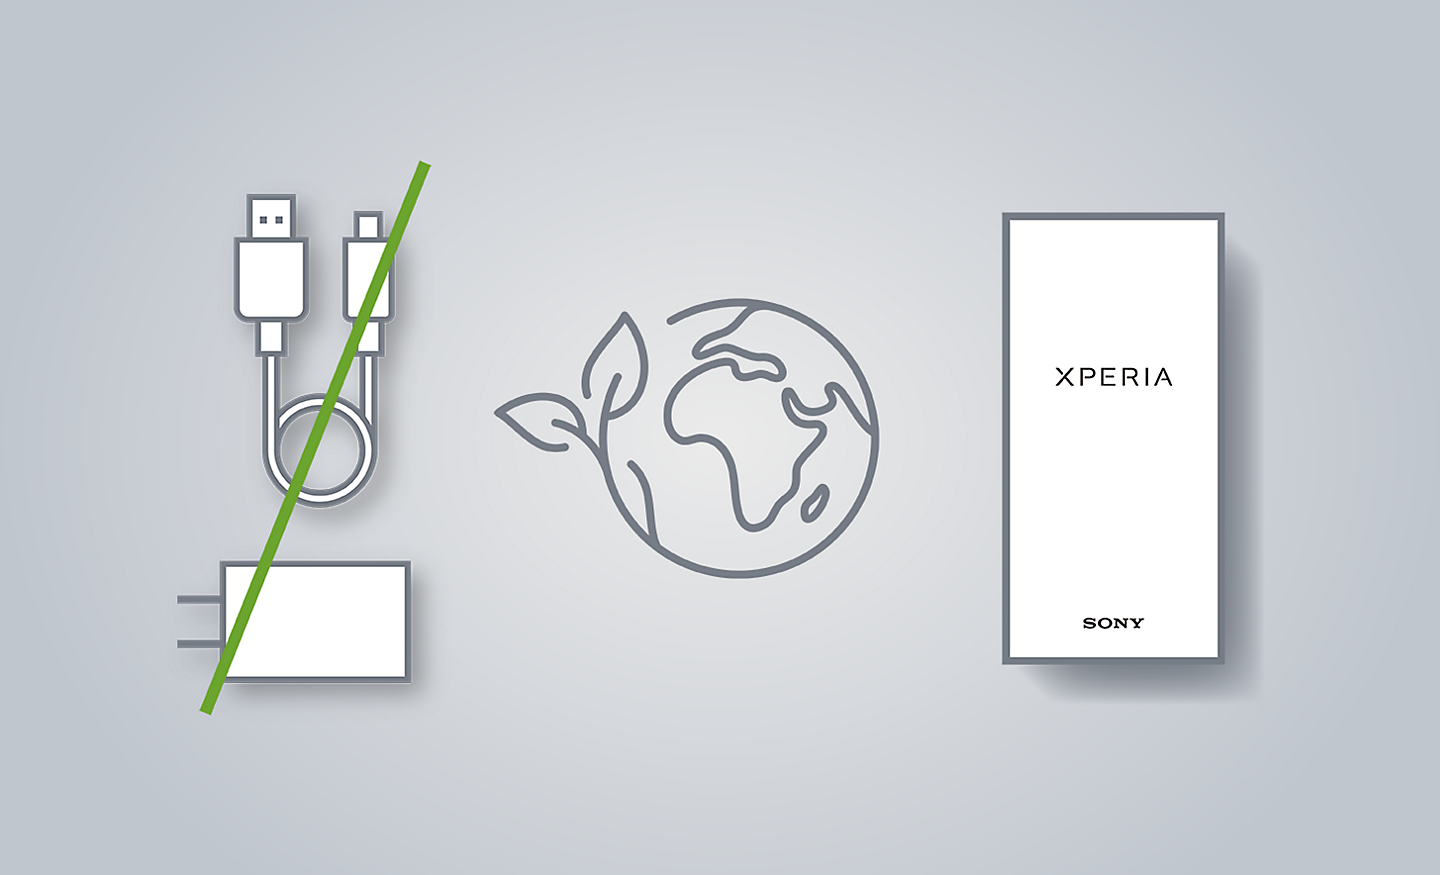 Illustration showing Xperia, a world icon and a charger with a line through it